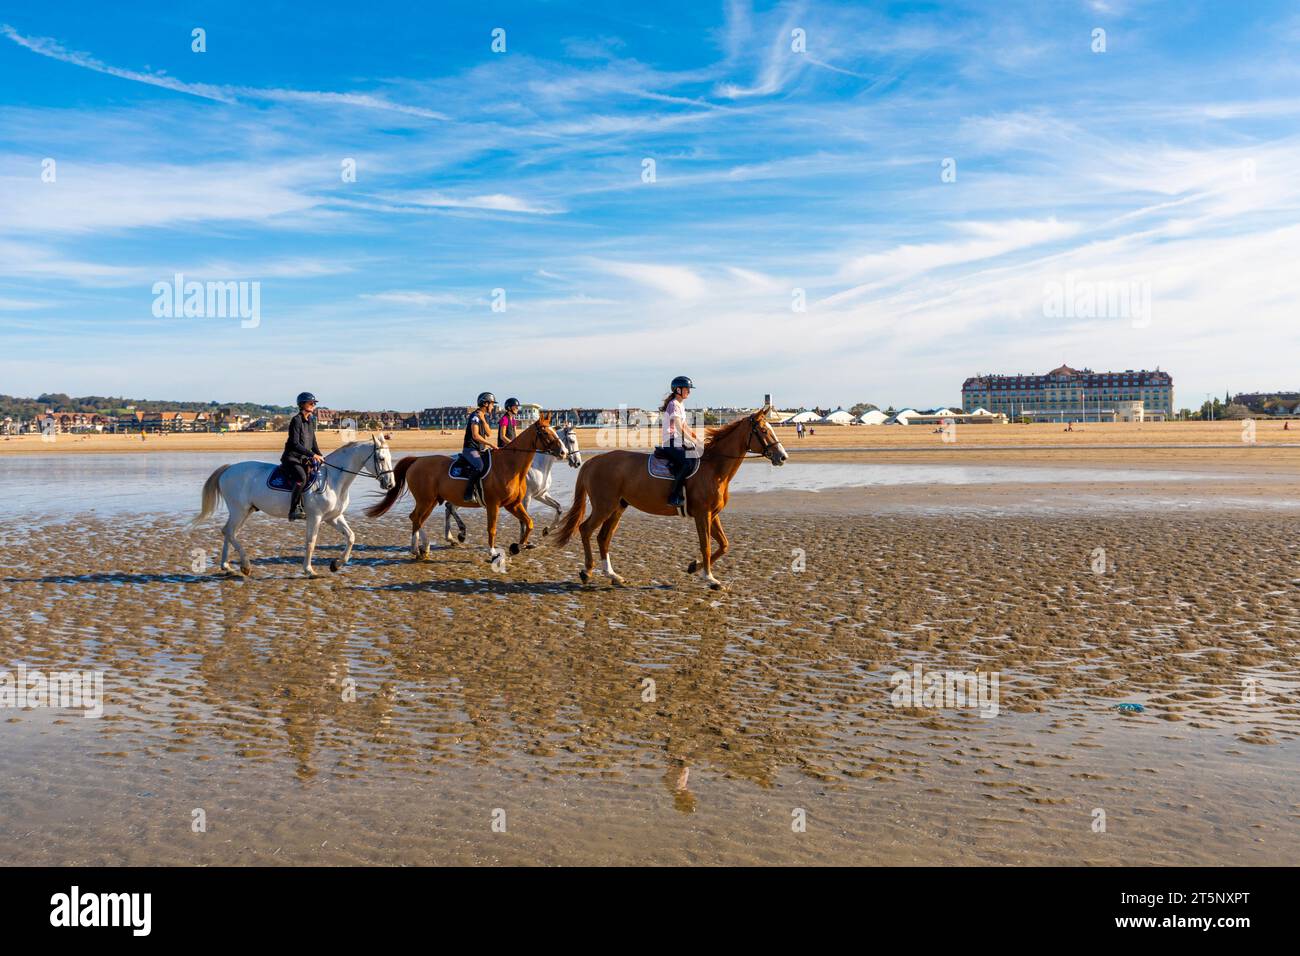 Horses Riding on the Beach at Deauville, Deauville, Normandy, France, North West Europe Stock Photo